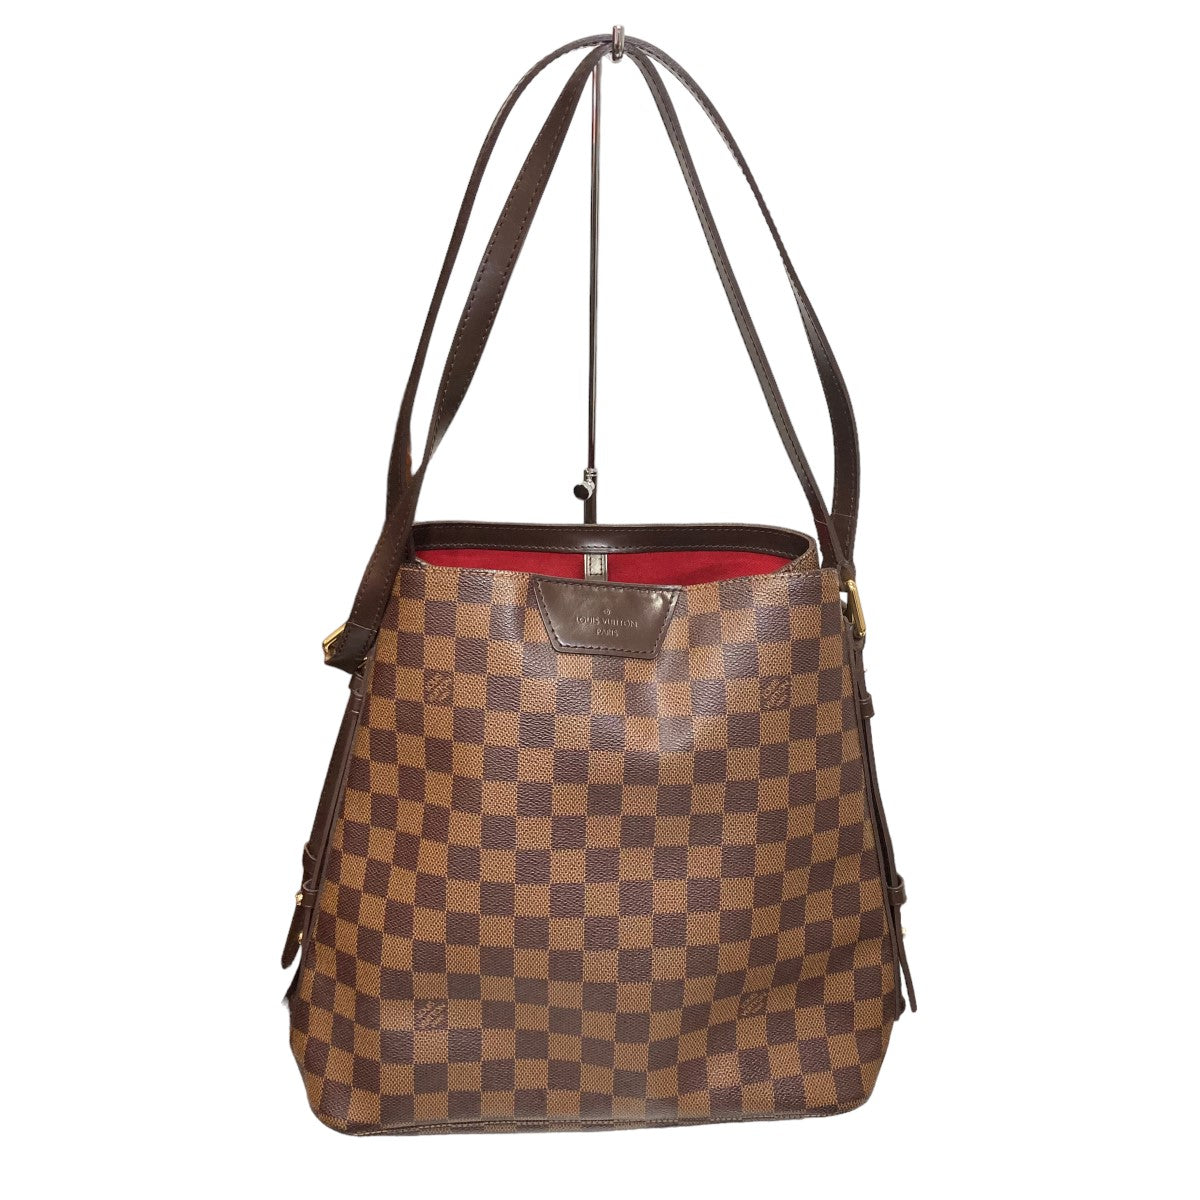 LOUIS VUITTON(ルイヴィトン) N41108「ダミエ カバ・リヴィントン 